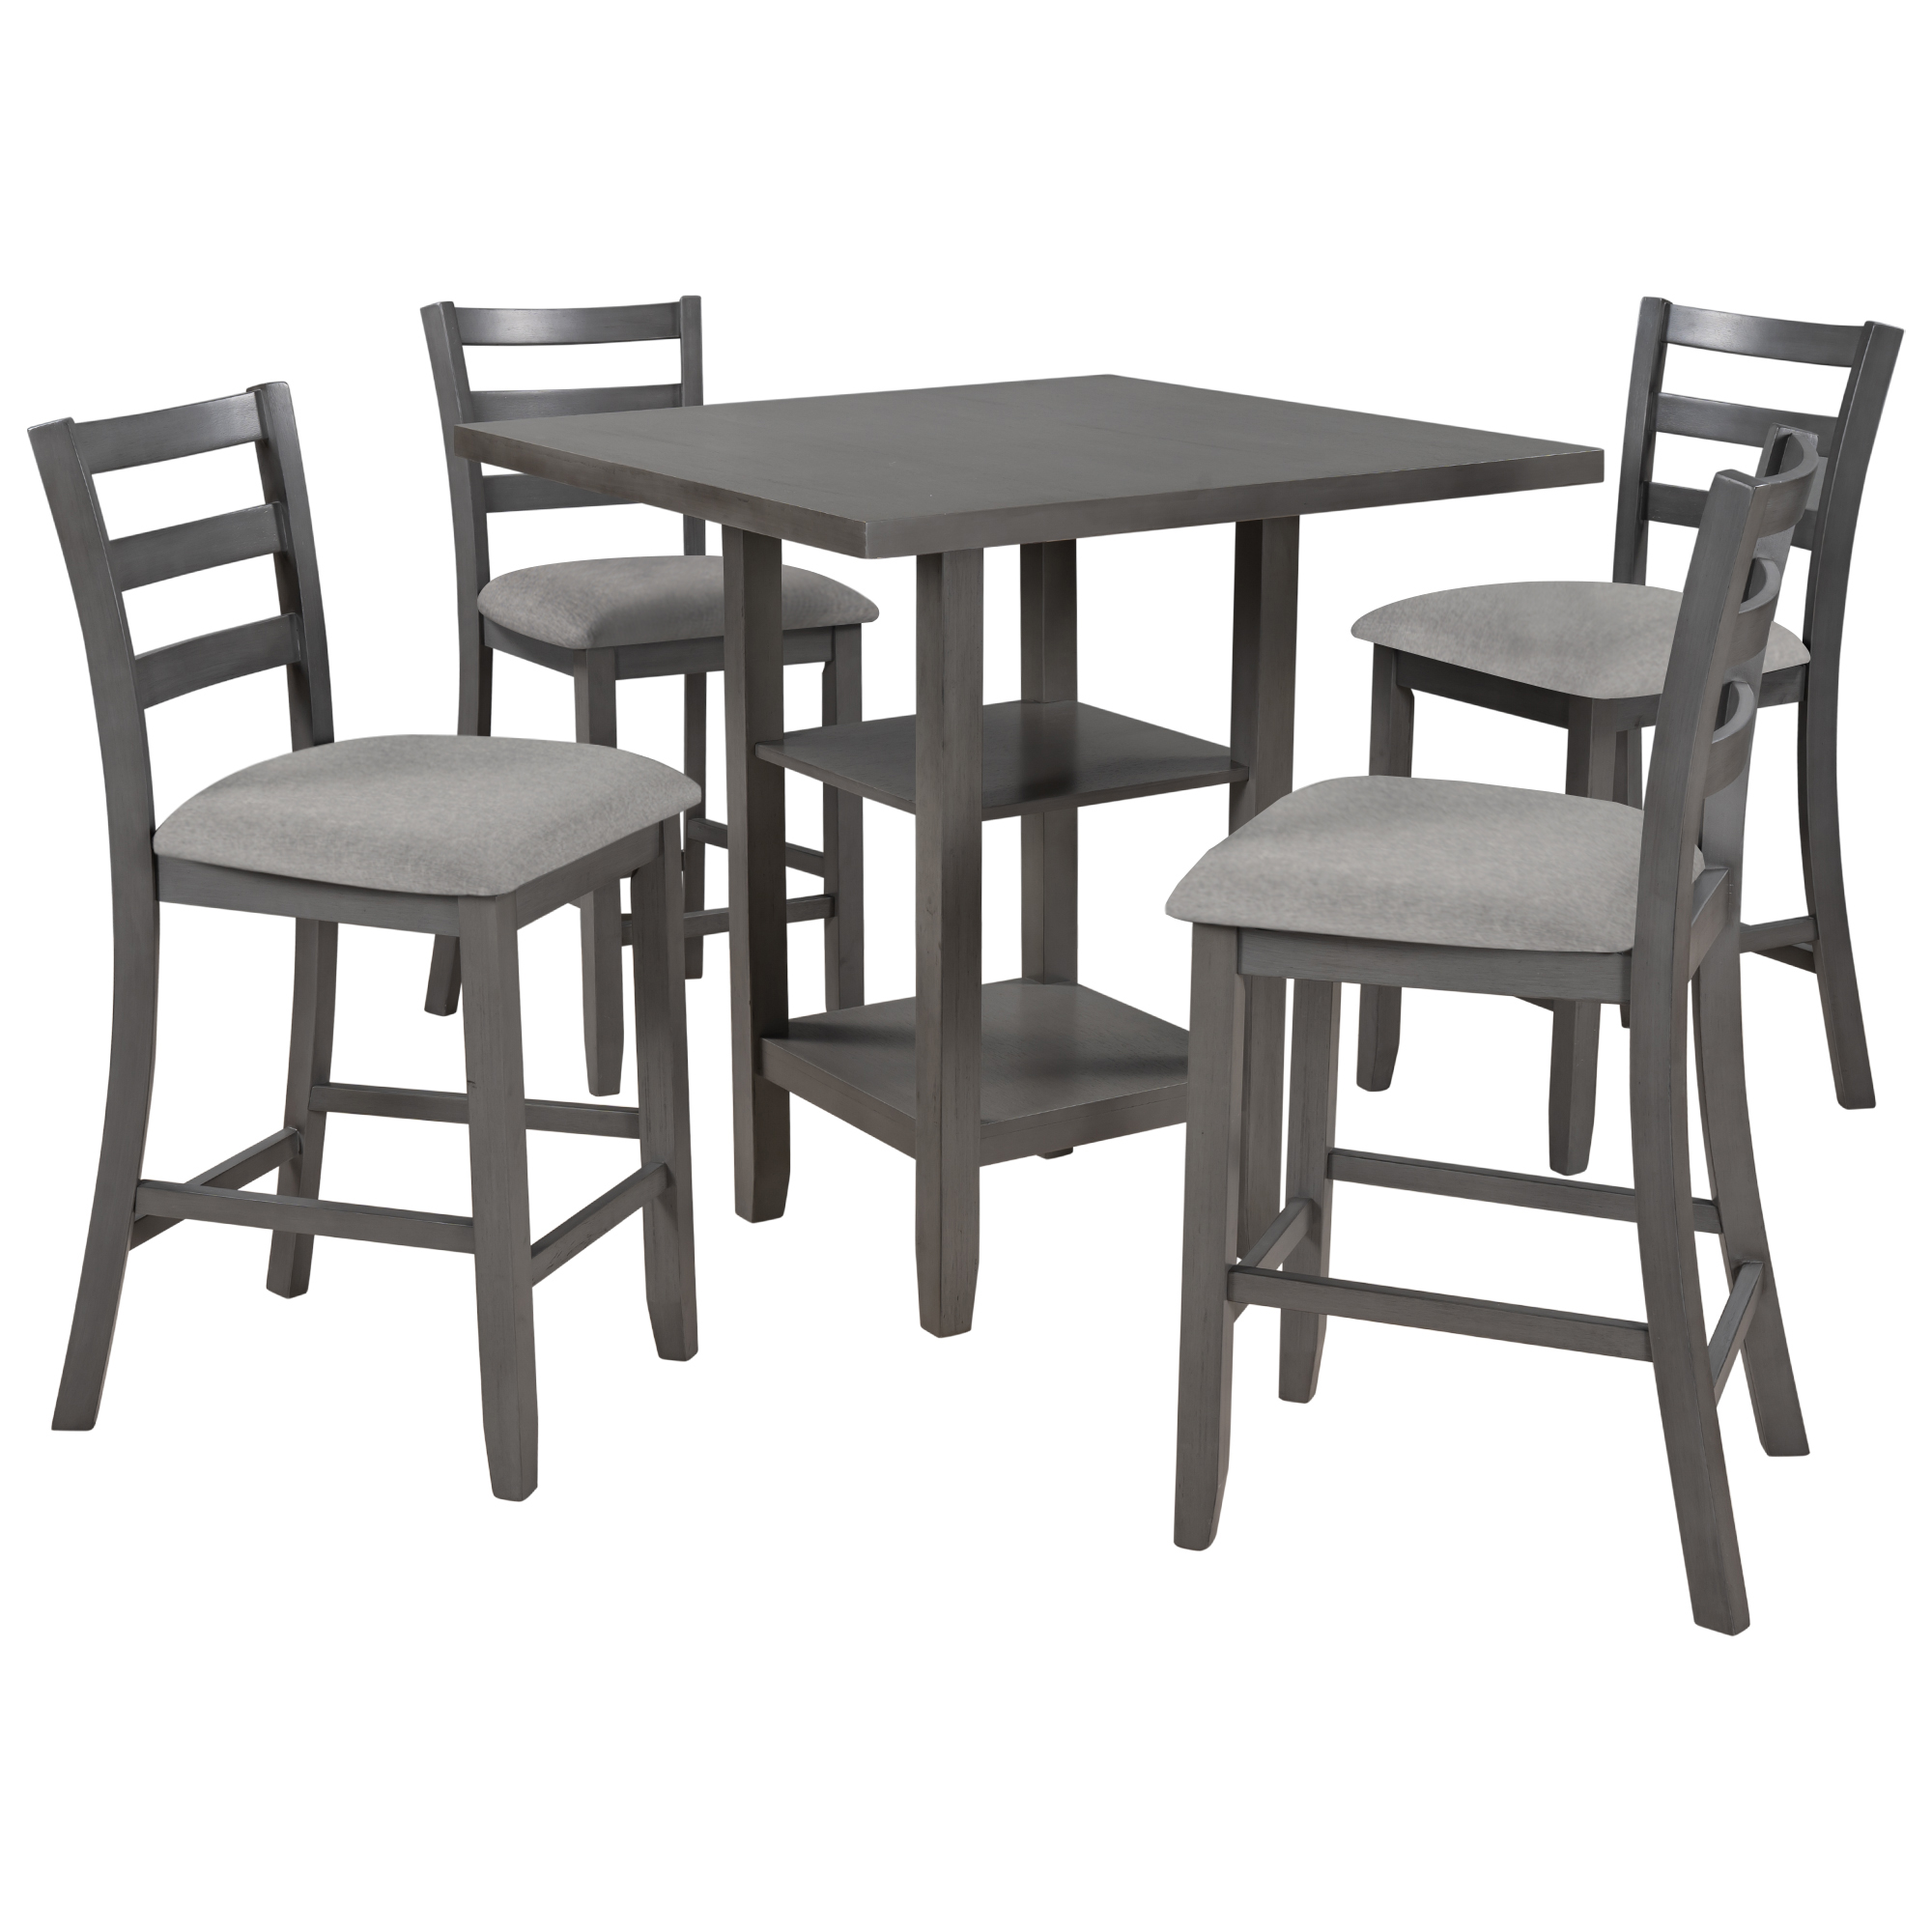 Wooden 5-Piece Counter Height Dining Set - ST000034AAE